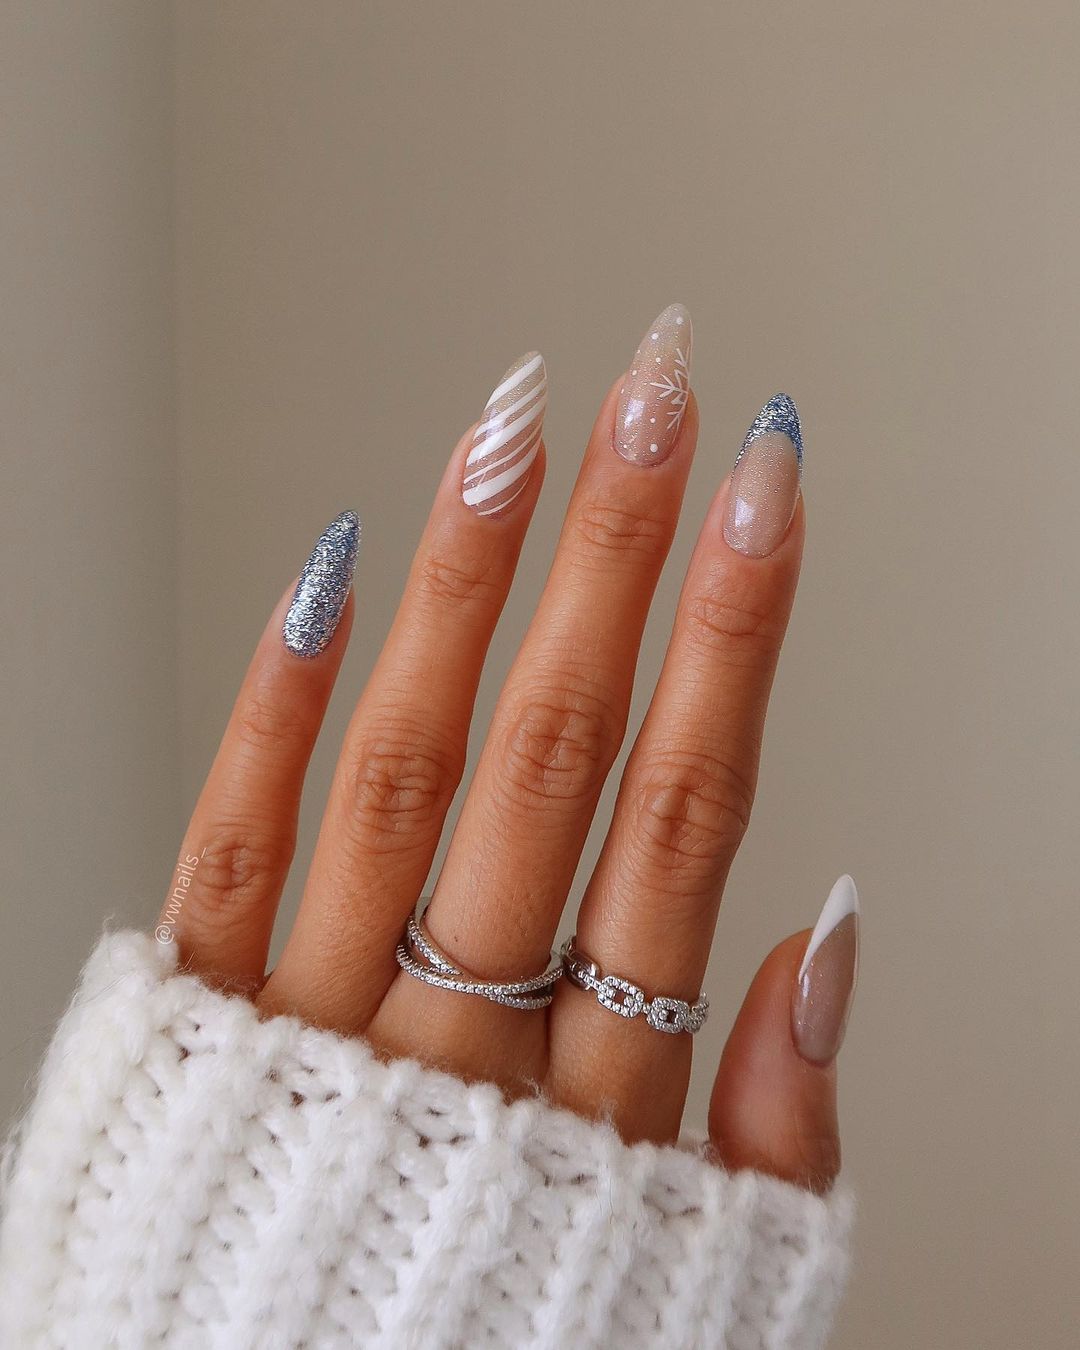 White French Tip Christmas Nails